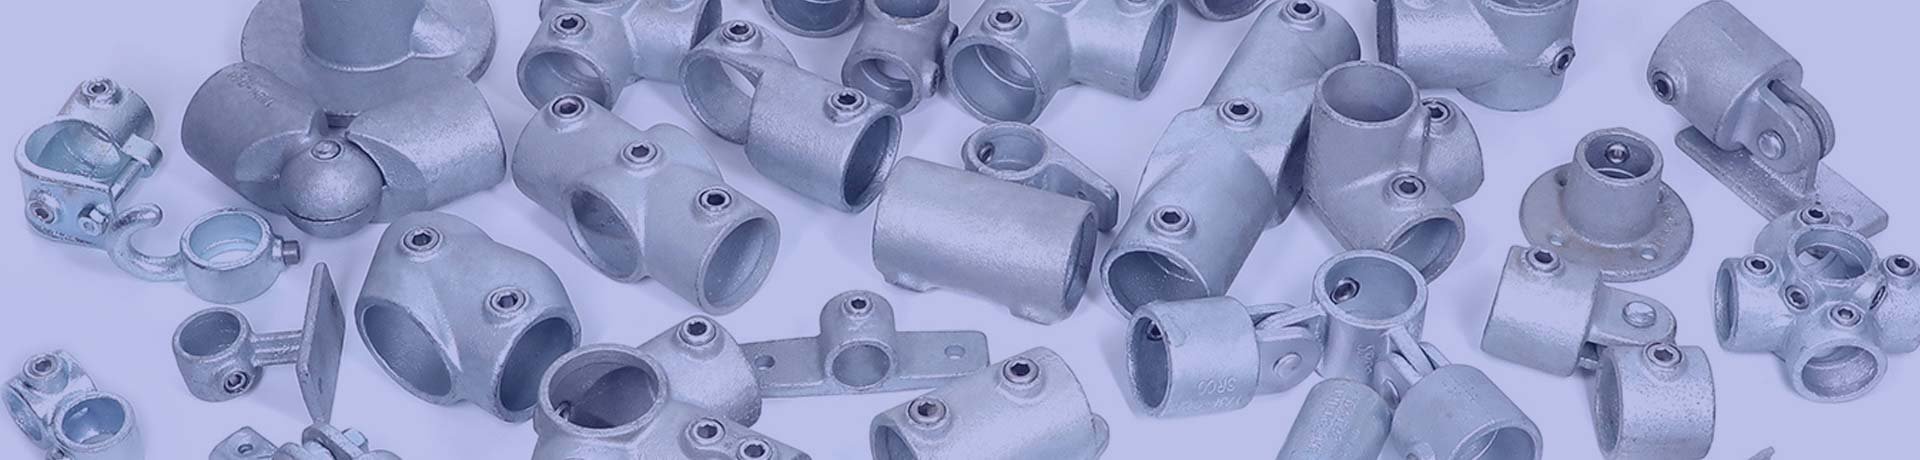 Structural Pipe Fittings Banner